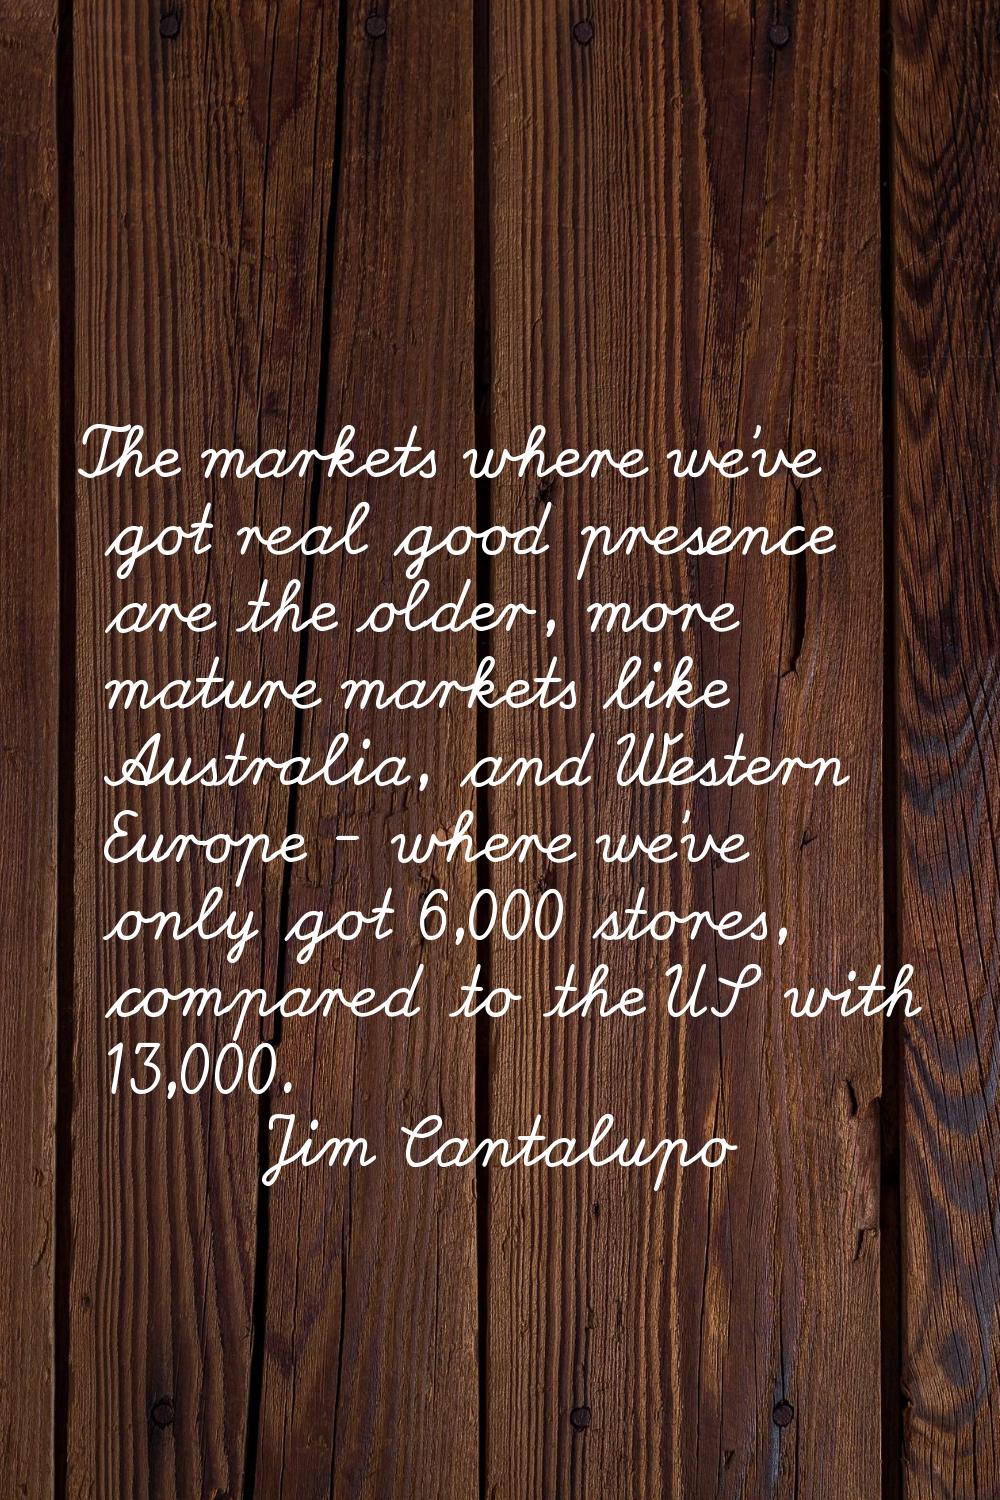 The markets where we've got real good presence are the older, more mature markets like Australia, a